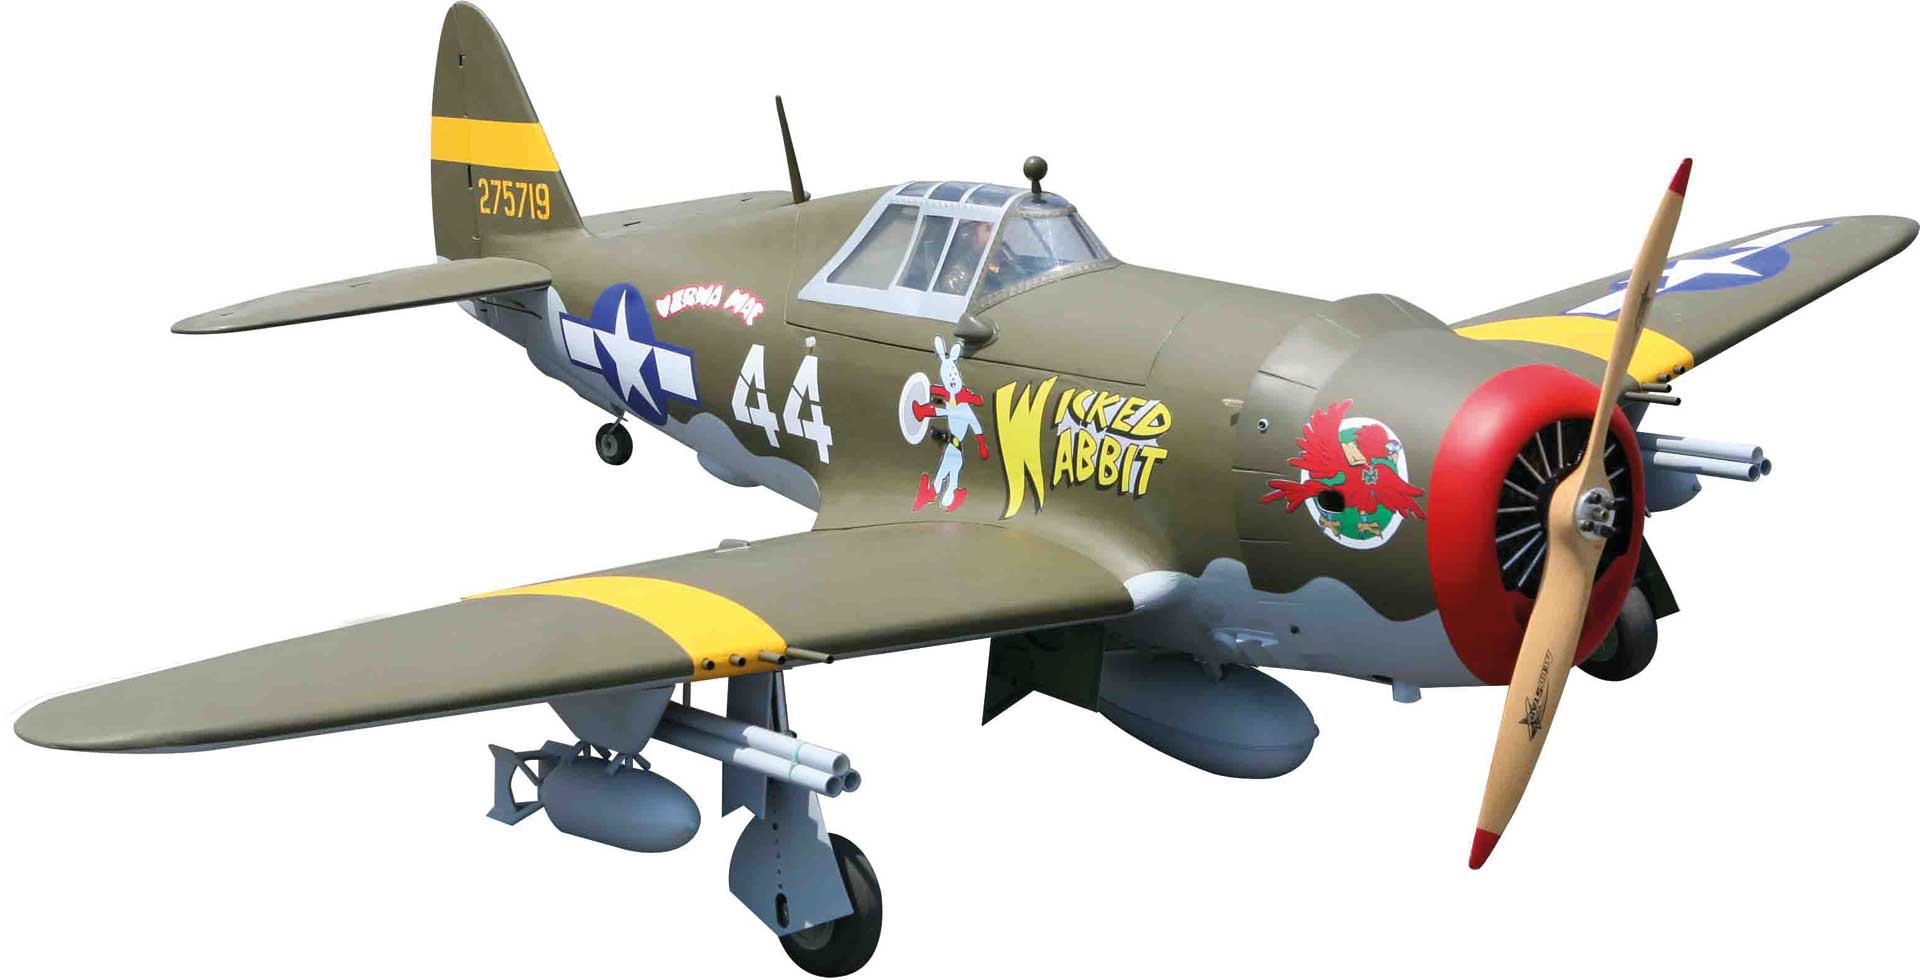 Seagull Models ( SG-Models ) P-47 THUNDERBOLT RAZORBACK ARF Warbird GIANT SCALE 2,06m with electr. retractable landing gear